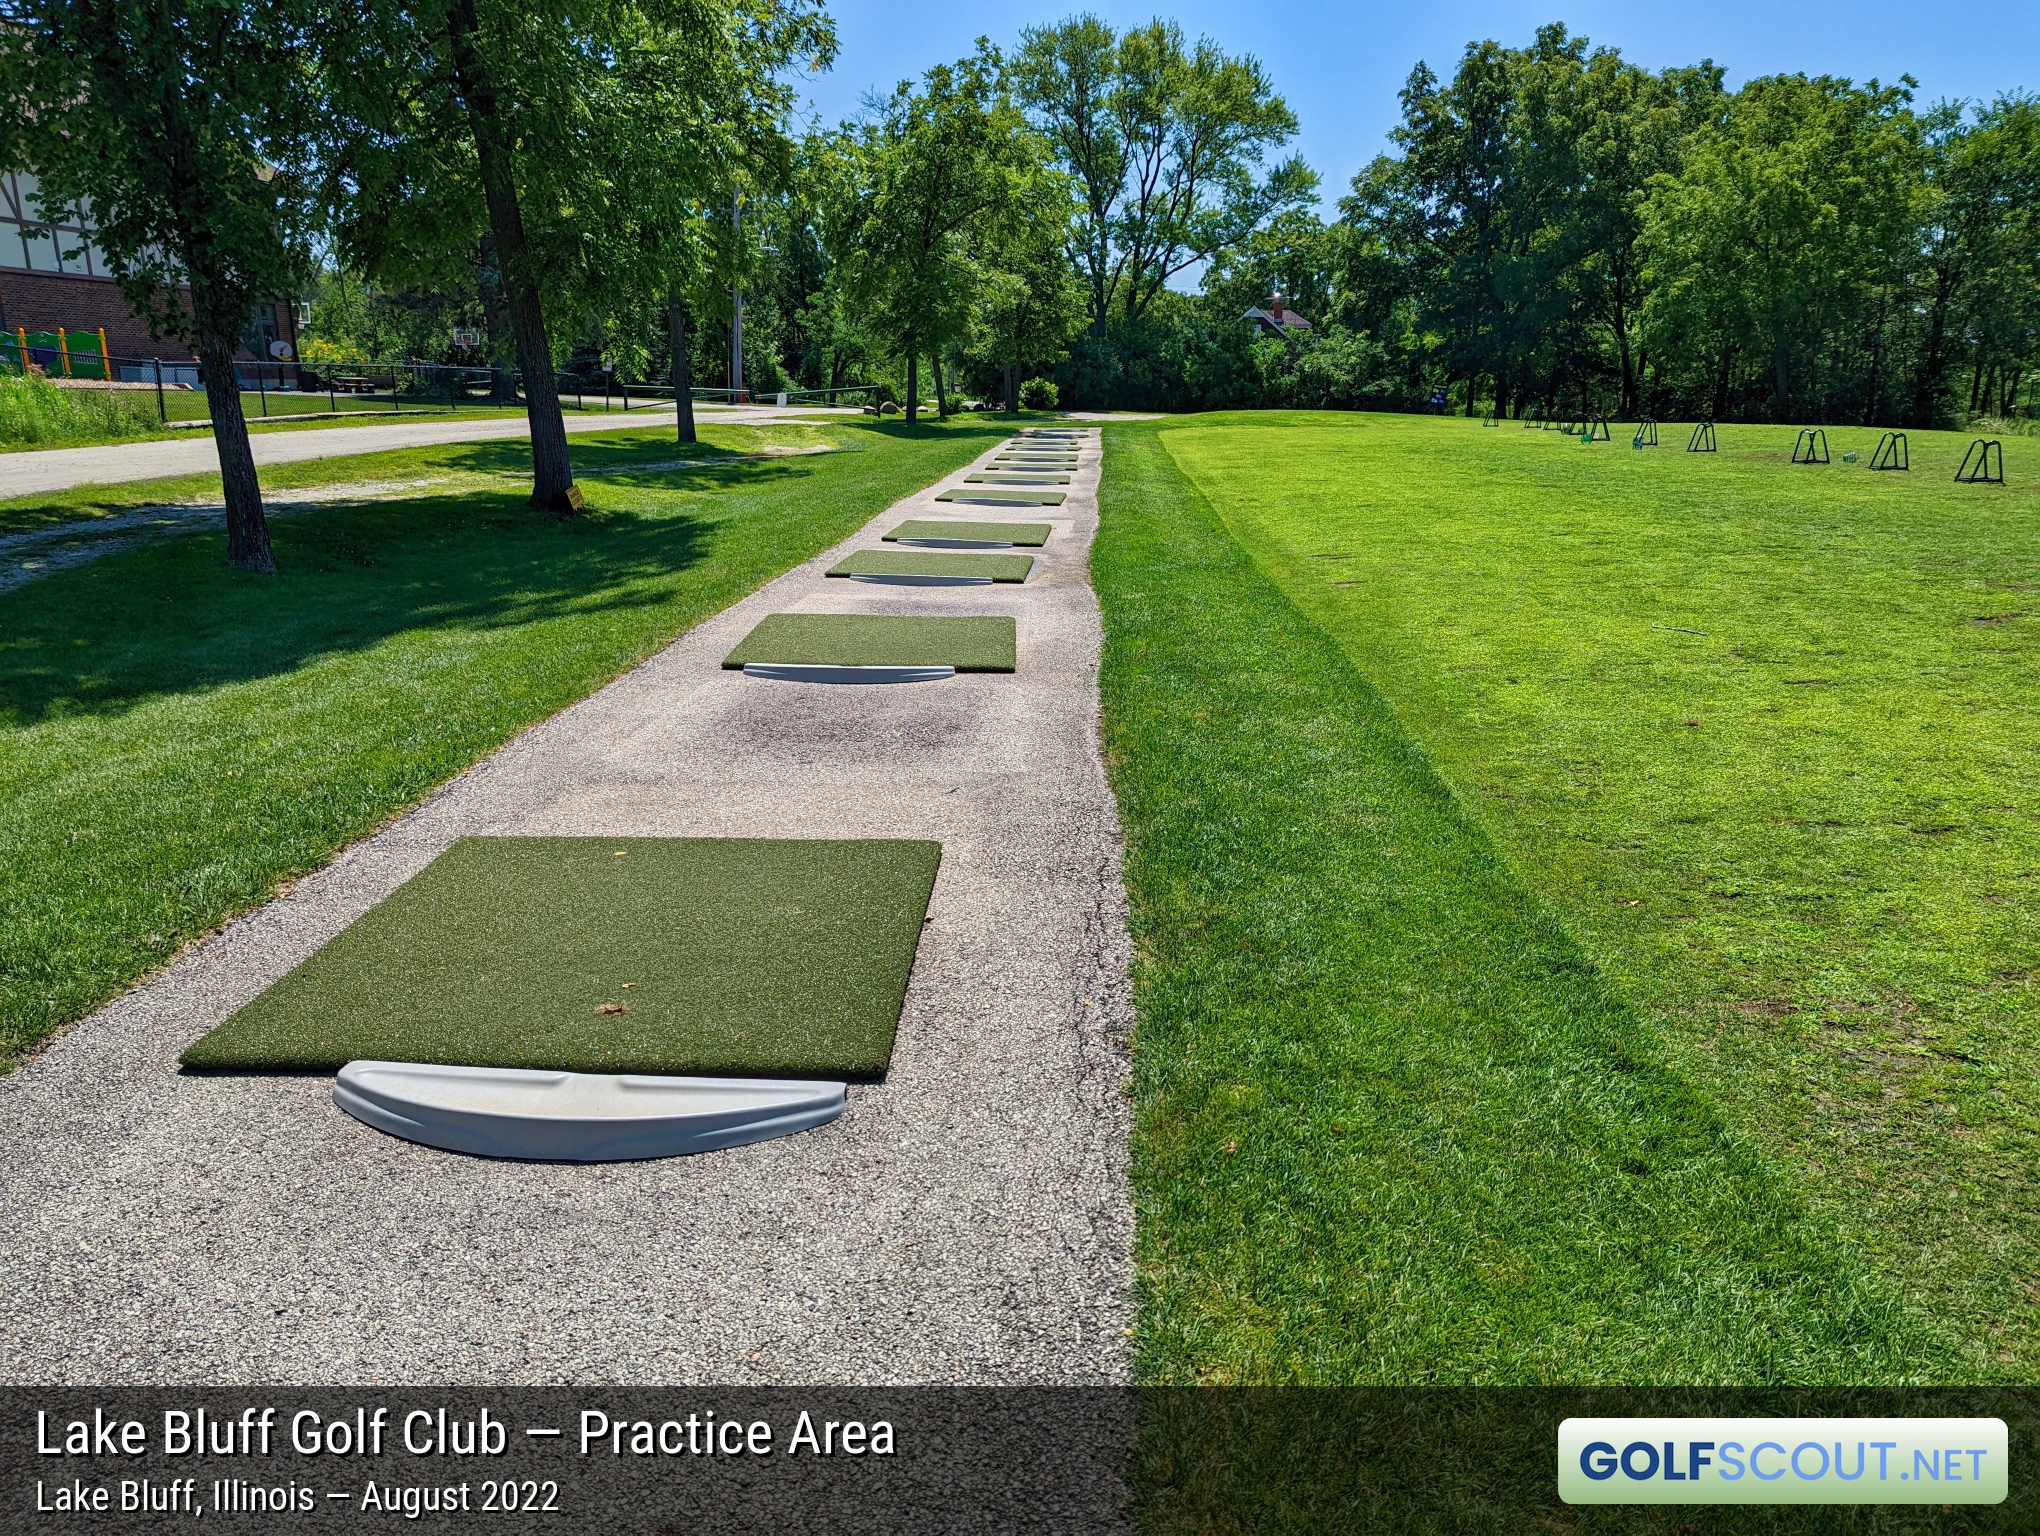 Photo of the practice area at Lake Bluff Golf Club in Lake Bluff, Illinois. 